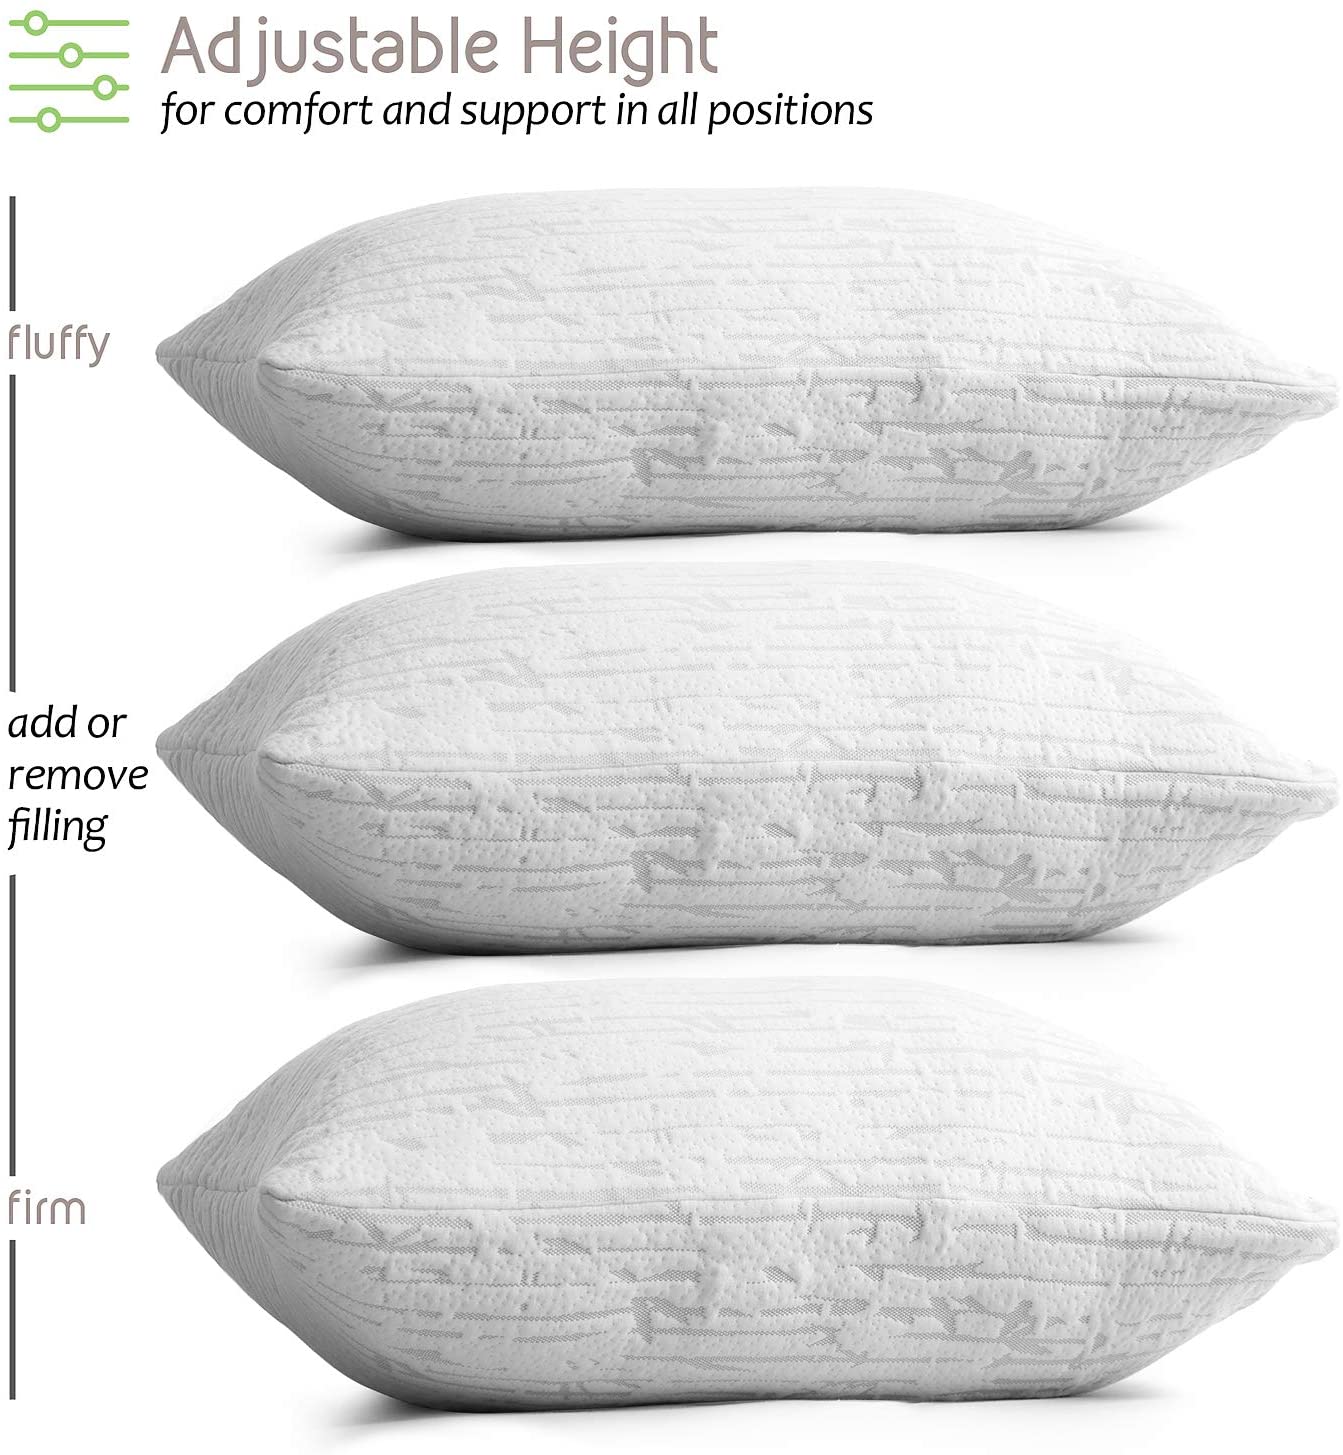 Hearth & Harbor Bed Pillow, Bamboo Pillows for Bed, Queen Size Pillows - image 6 of 8